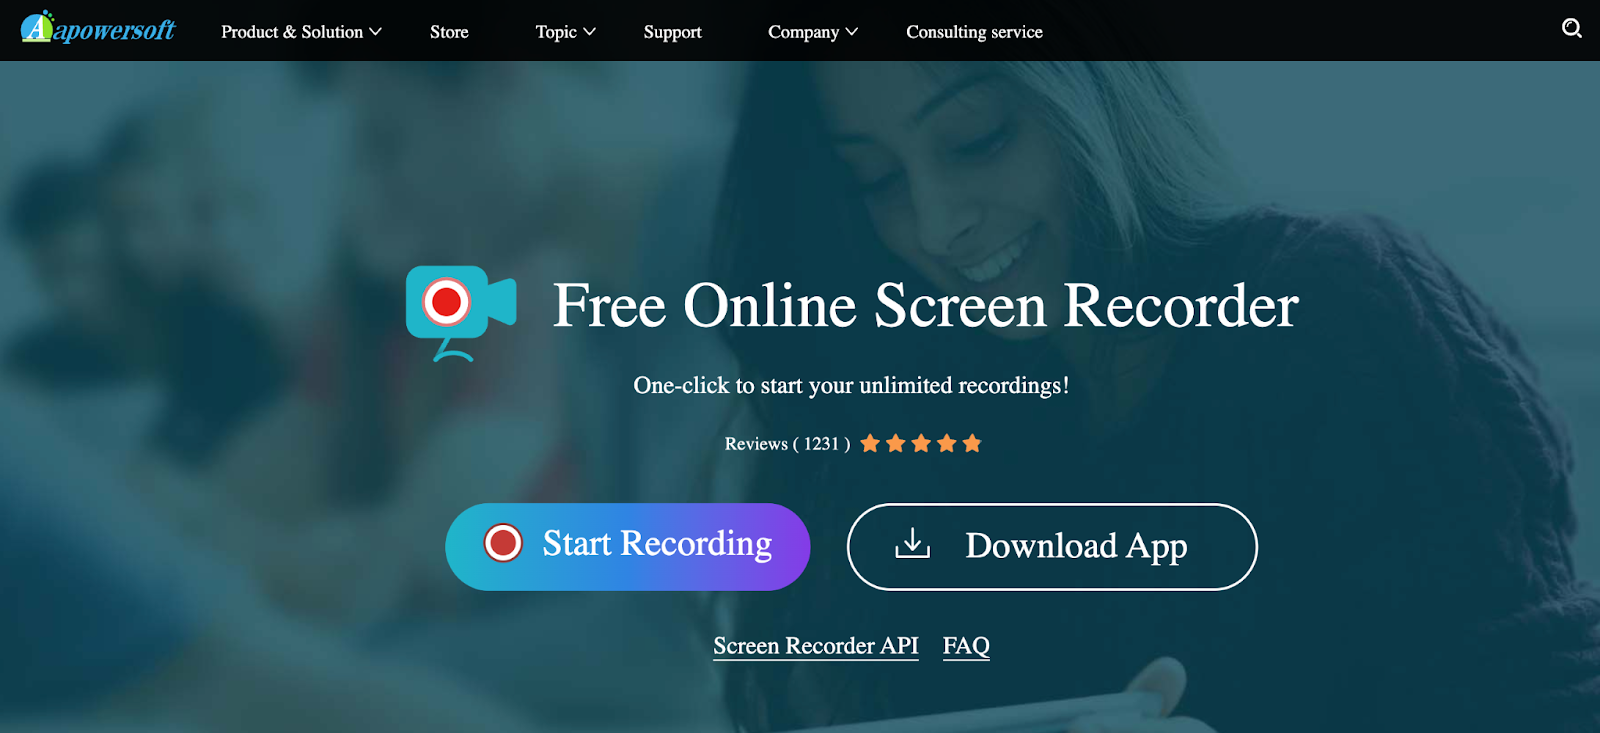 Best Free Screen Recorder for Mac and Windows: Apowersoft